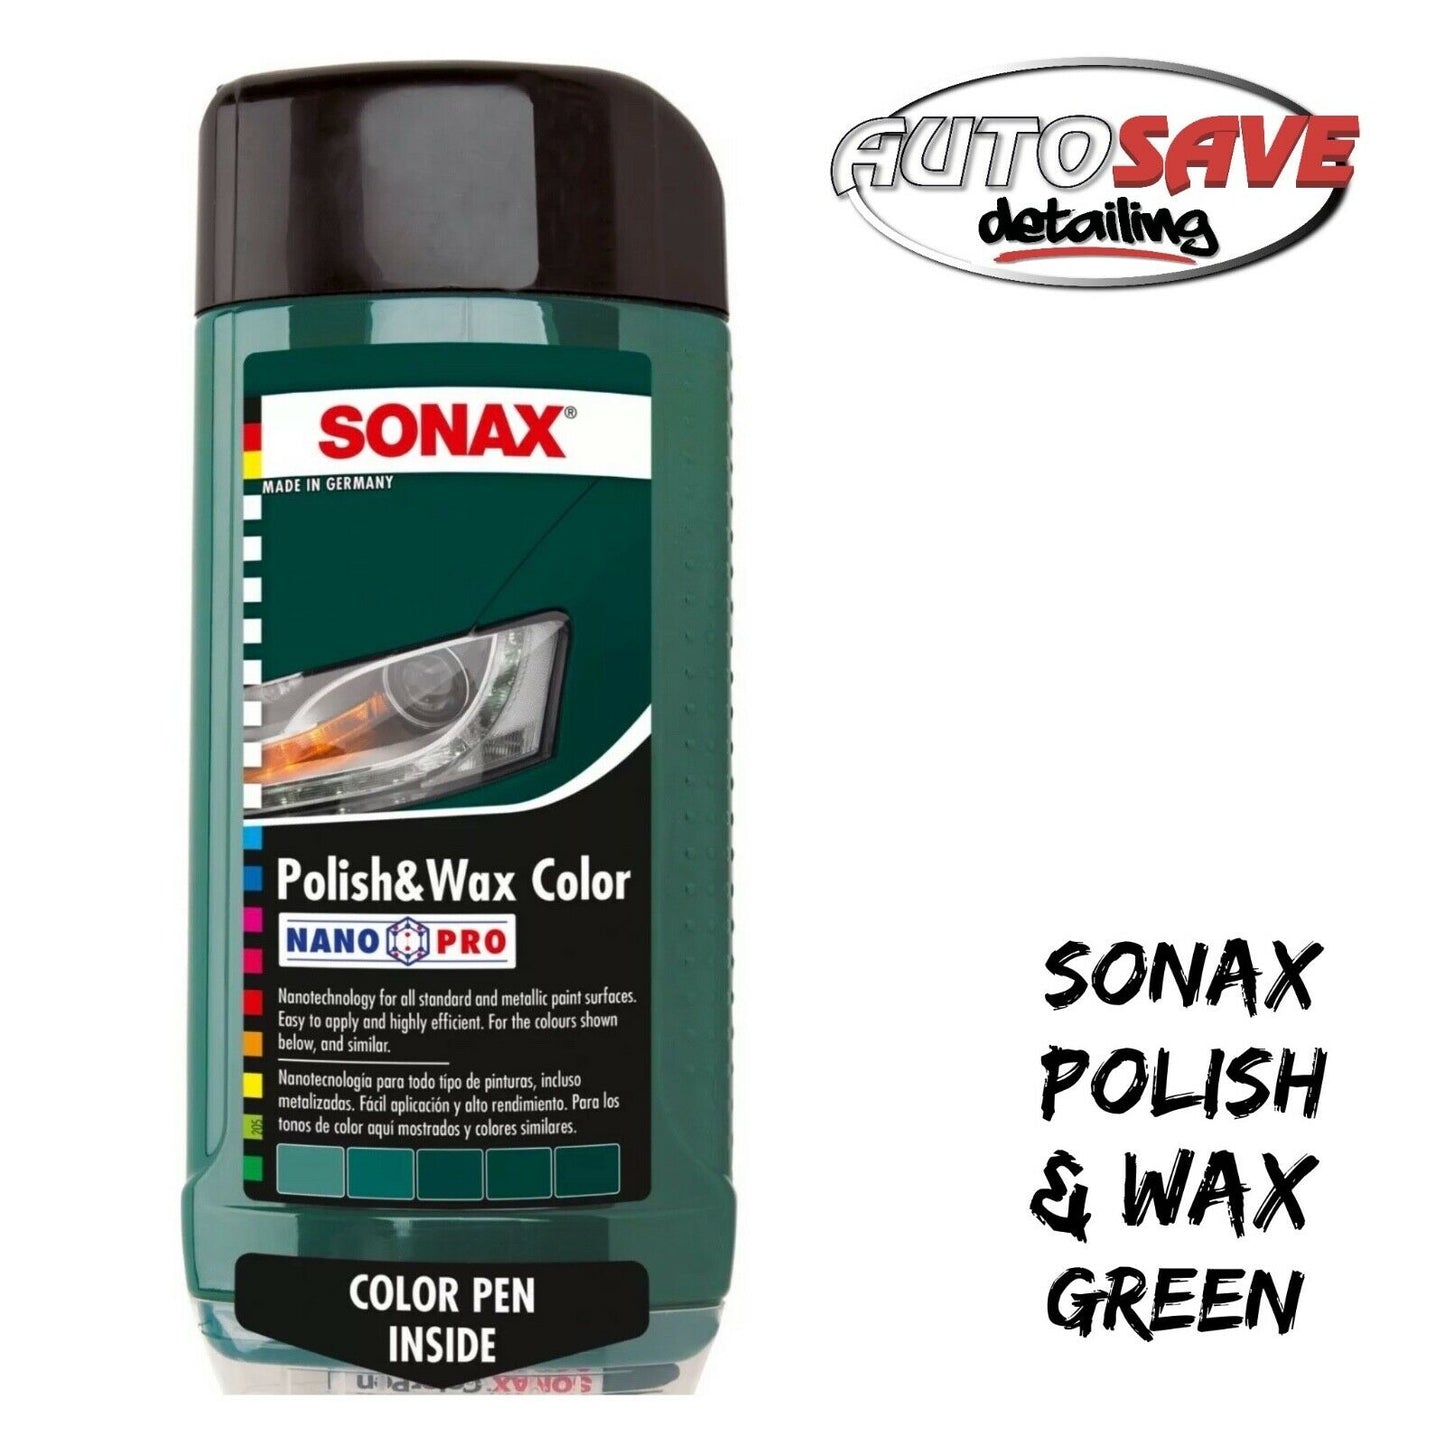 SONAX Polish & wax color NanoPro With colour pen inside 500ml shades of Green